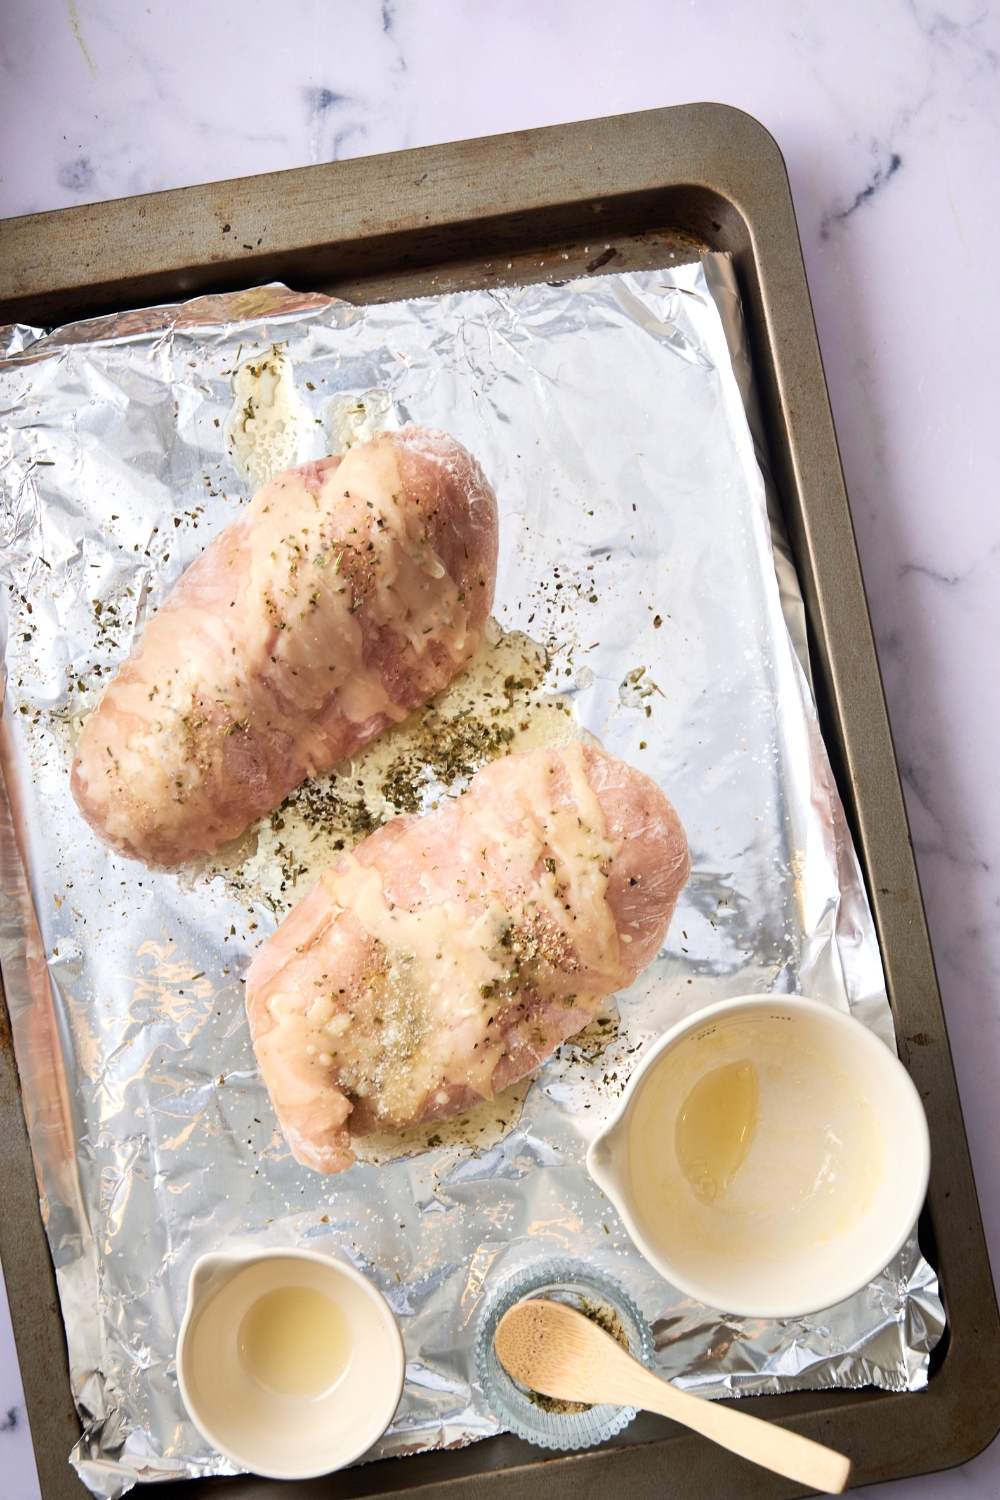 Two chicken breasts are sitting on a tin foil lined baking sheet. The chicken is covered in butter, oil, and seasoning.